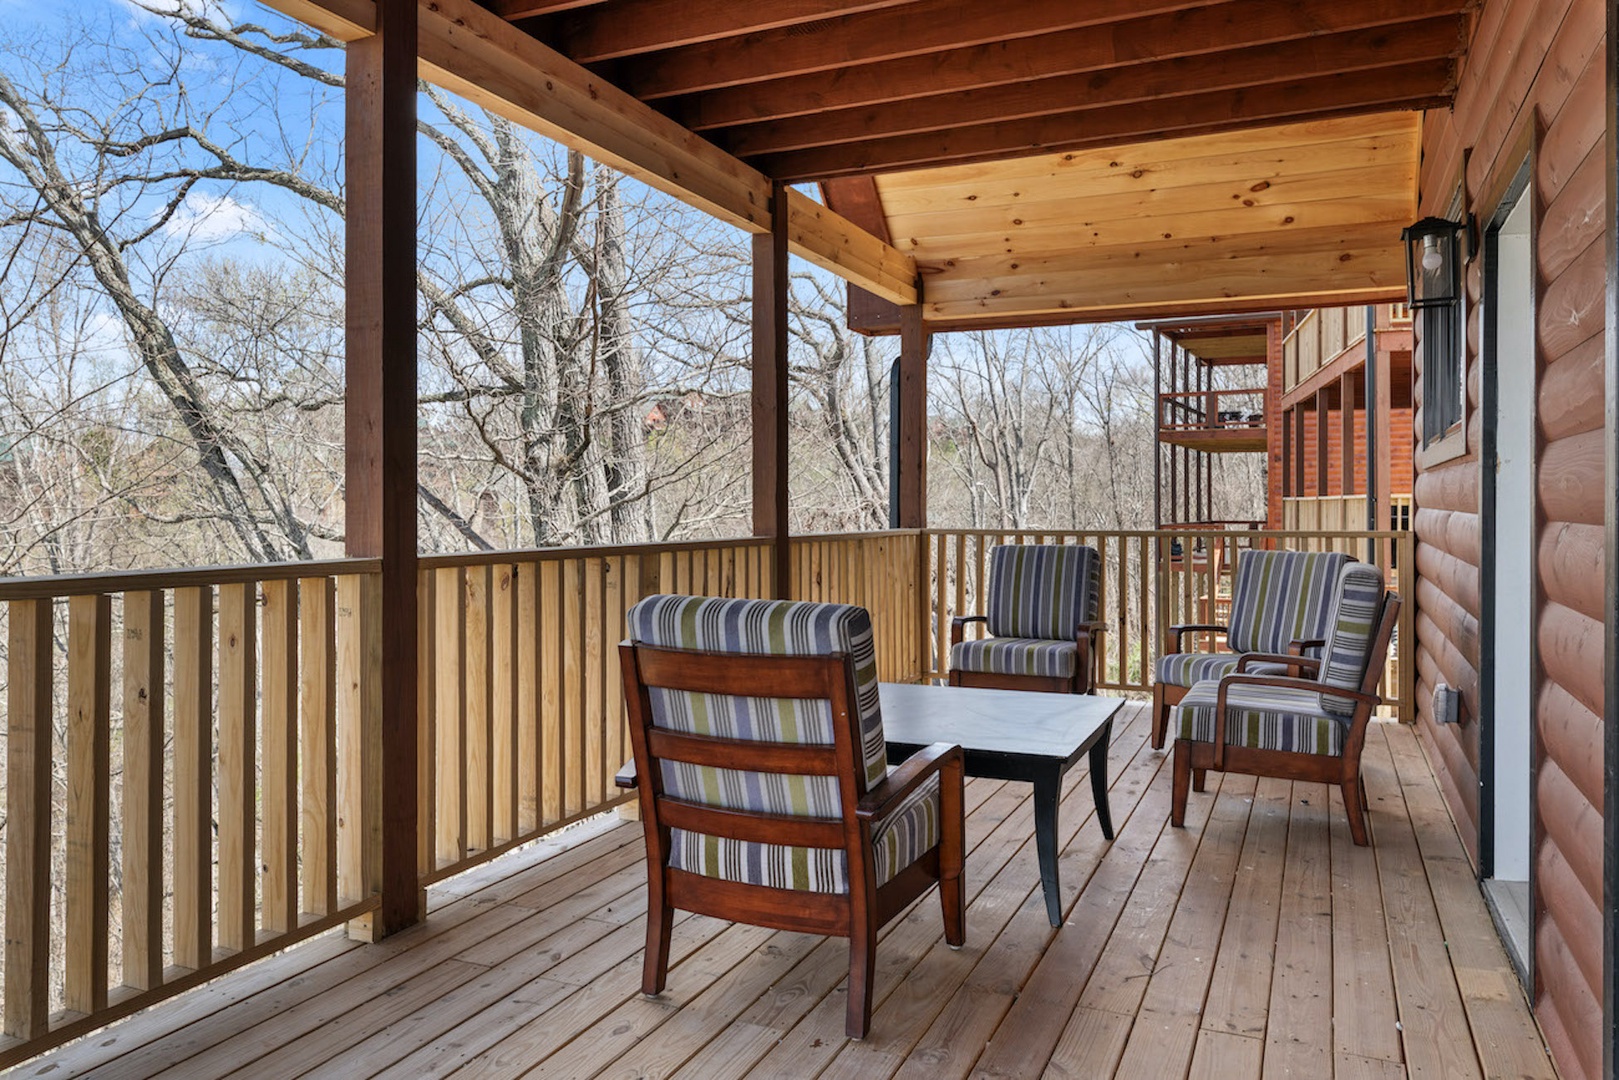 This home offers loads of options for outdoor relaxation!